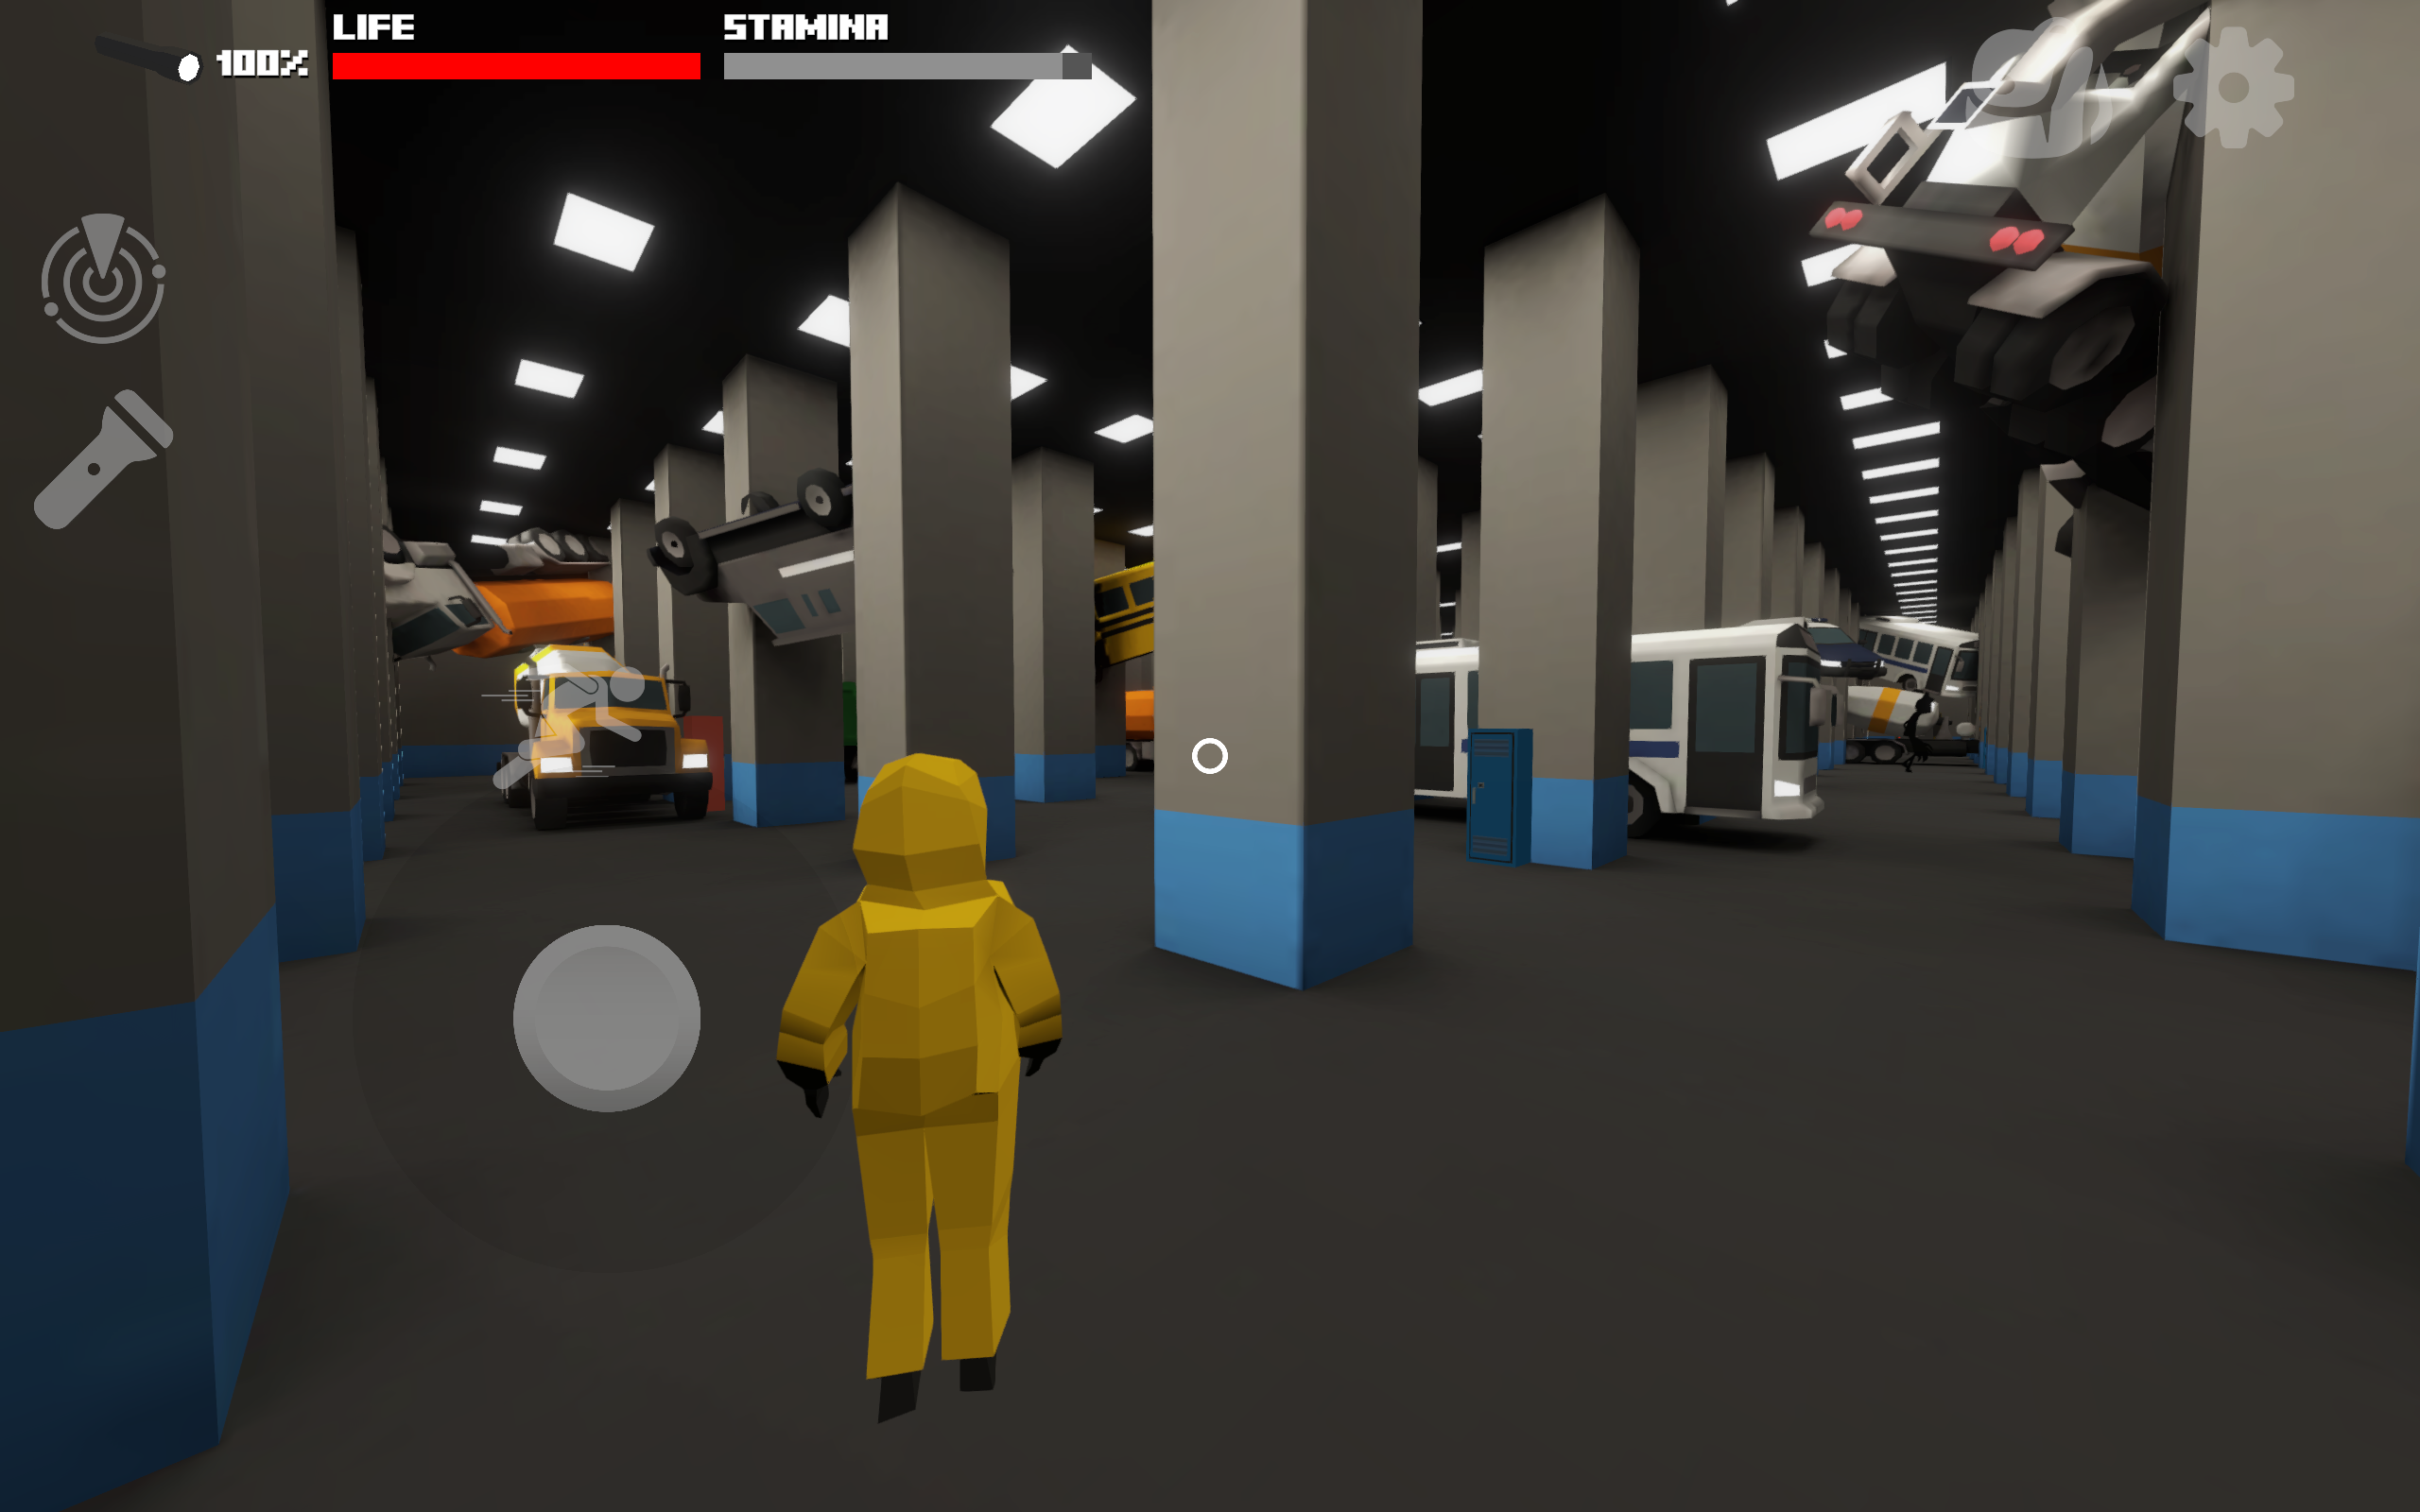 Project : Backrooms - Multiplayer v2.1 - Roblox